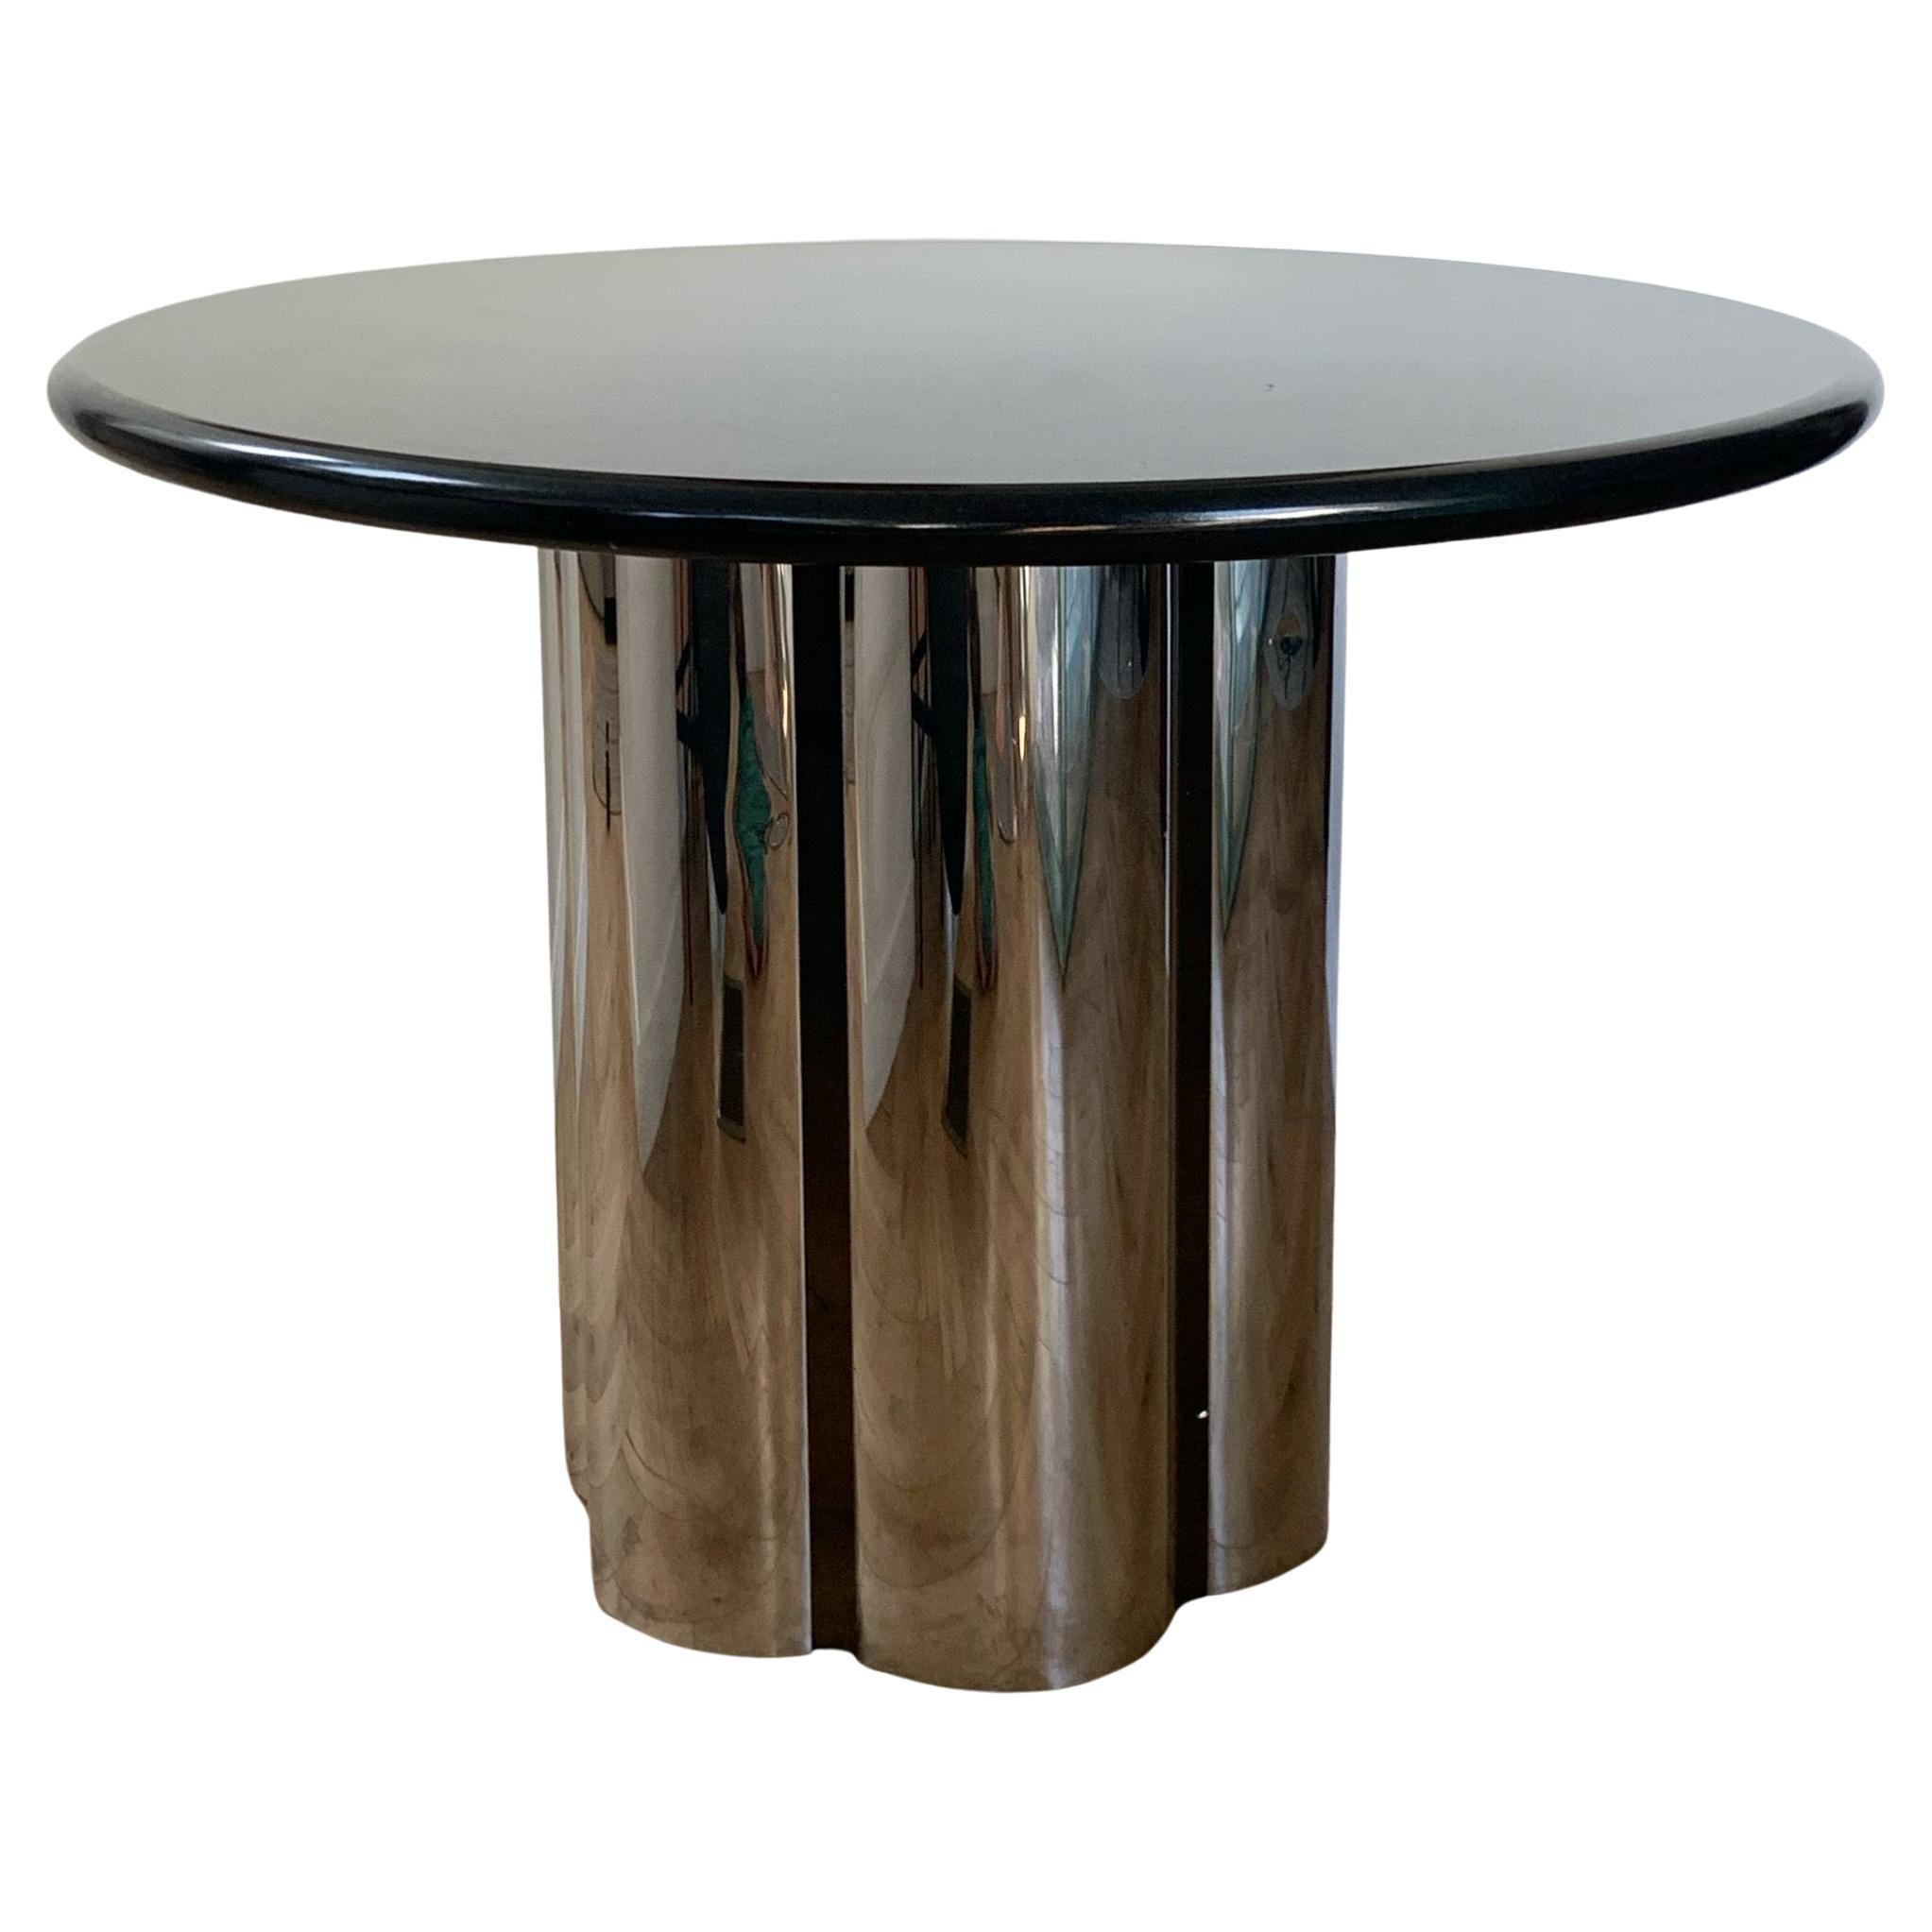 Brueton “Radial” Round Dining Table in Granite and Steel, circa 1970